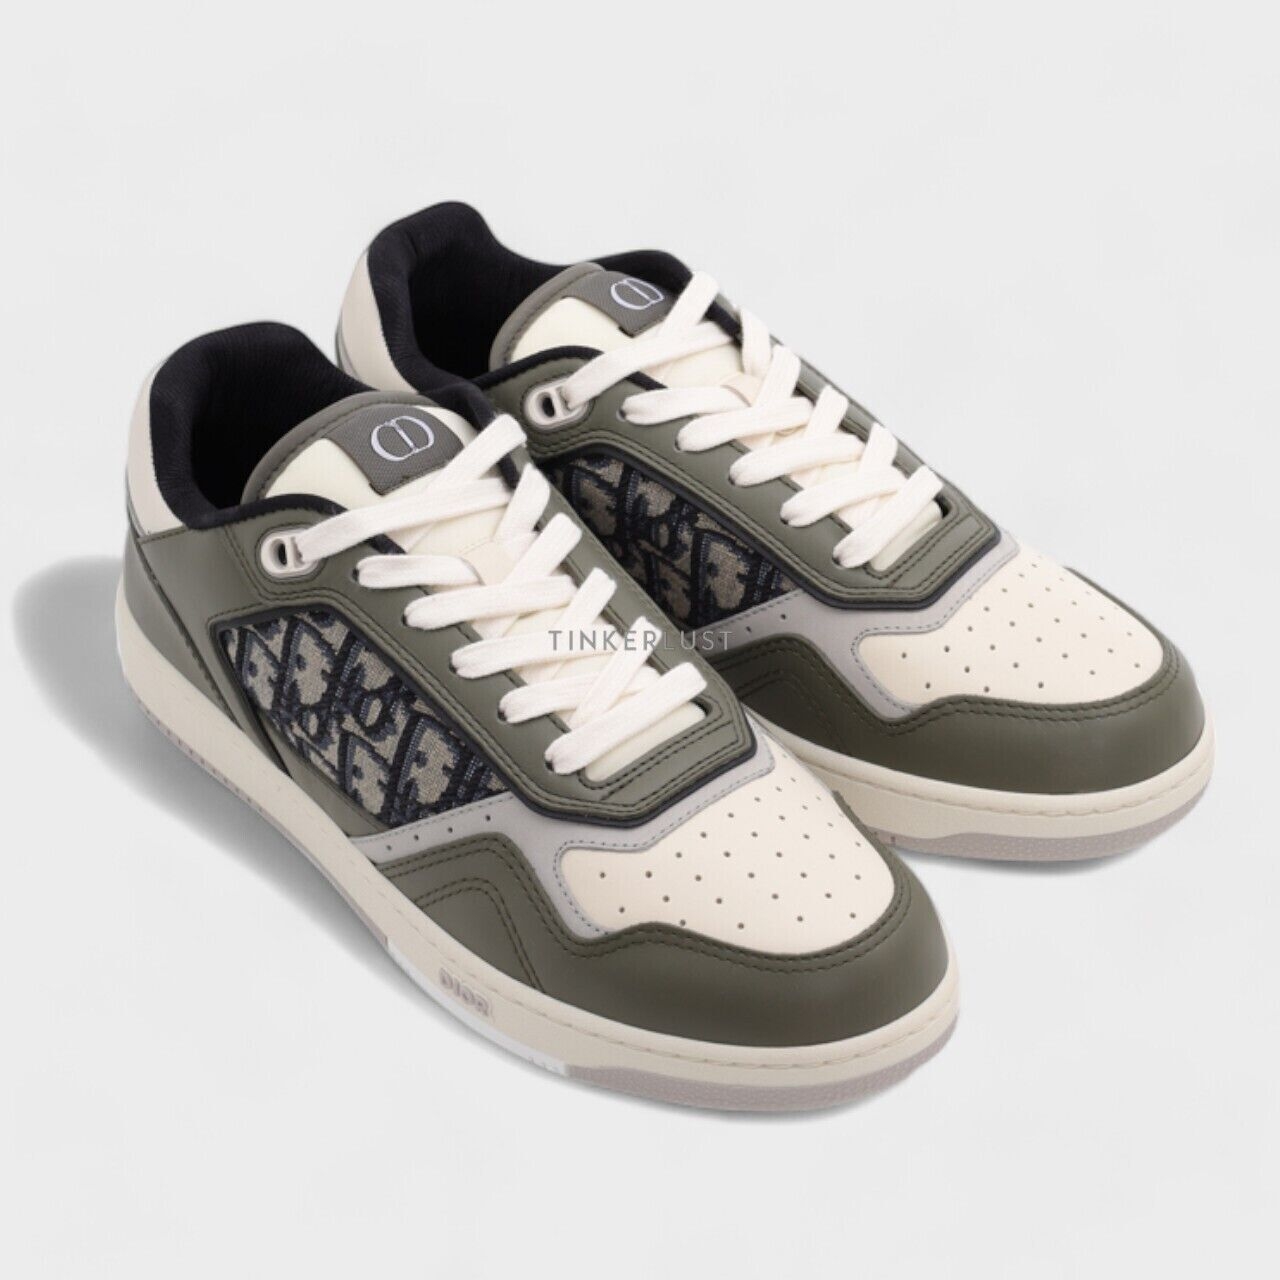 Christian Dior Oblique in Green/Beige Multicolors Low Top Sneakers